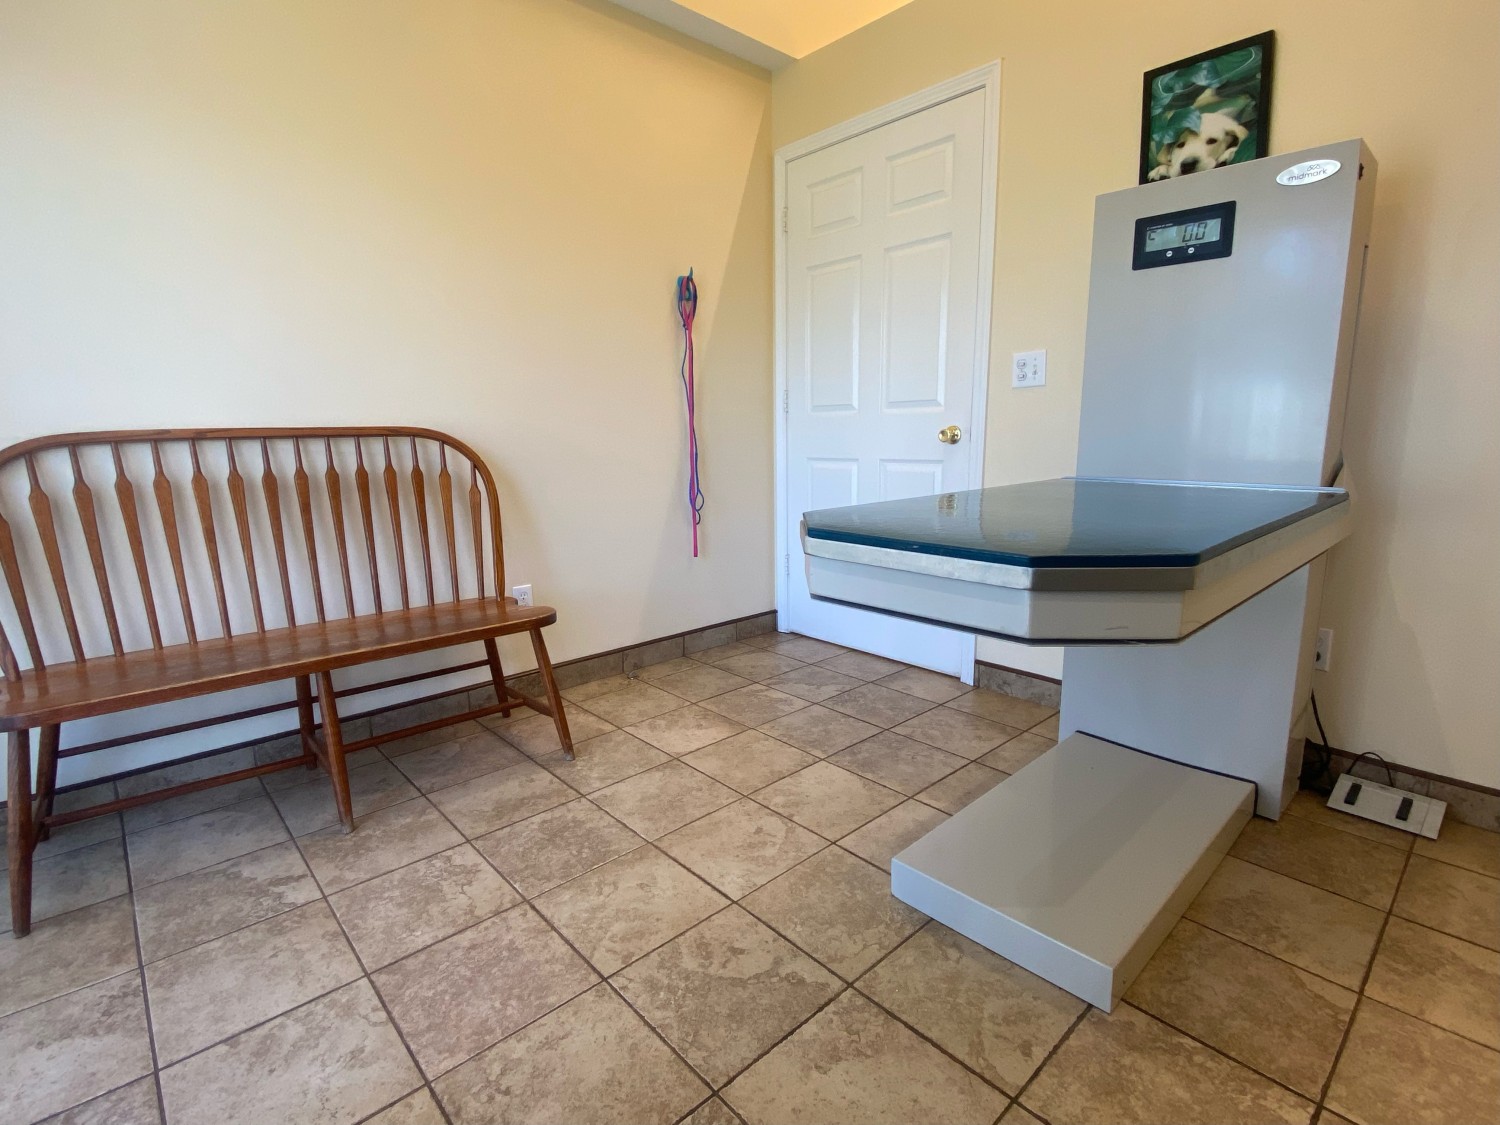 Veterinary Exam Room 3 - Equipped for laser therapy